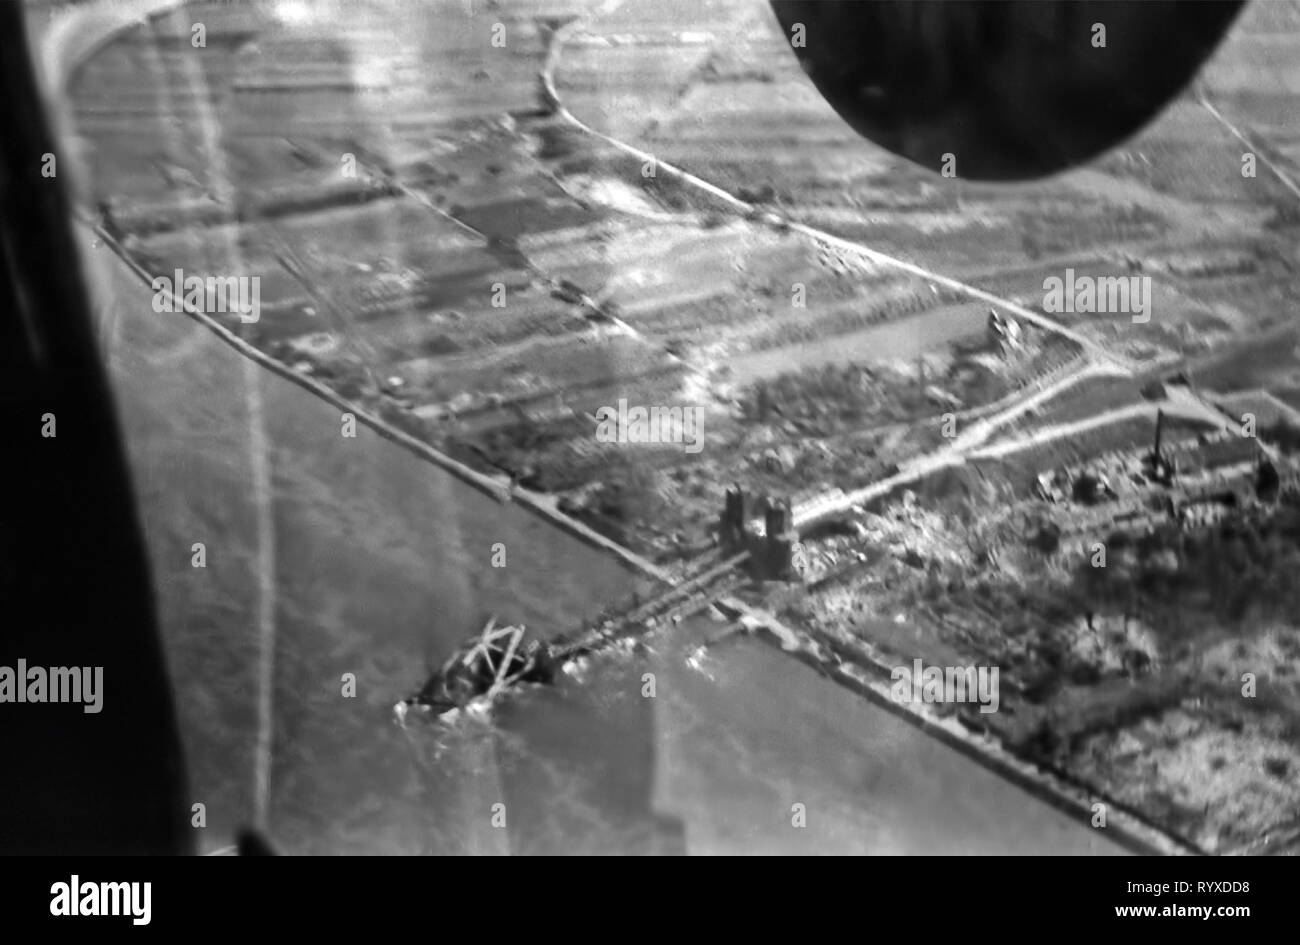 Personal photographs and memorabilia of fighting Americans during the Second World War. B-17 Flying Fortress bomber aerial damage assessment photography. Stock Photo